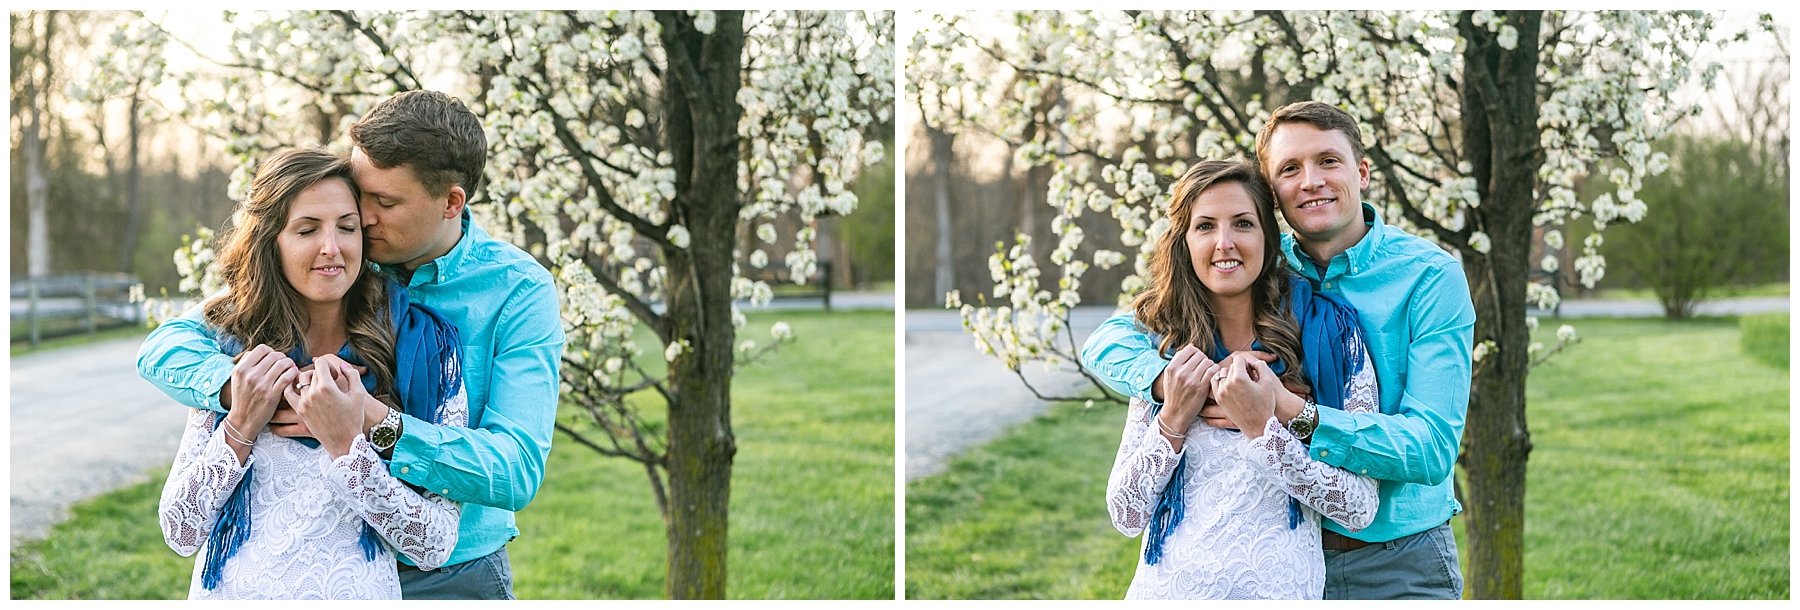 Chelsea Phil Private Estate Engagement Living Radiant Photography photos color_0032.jpg